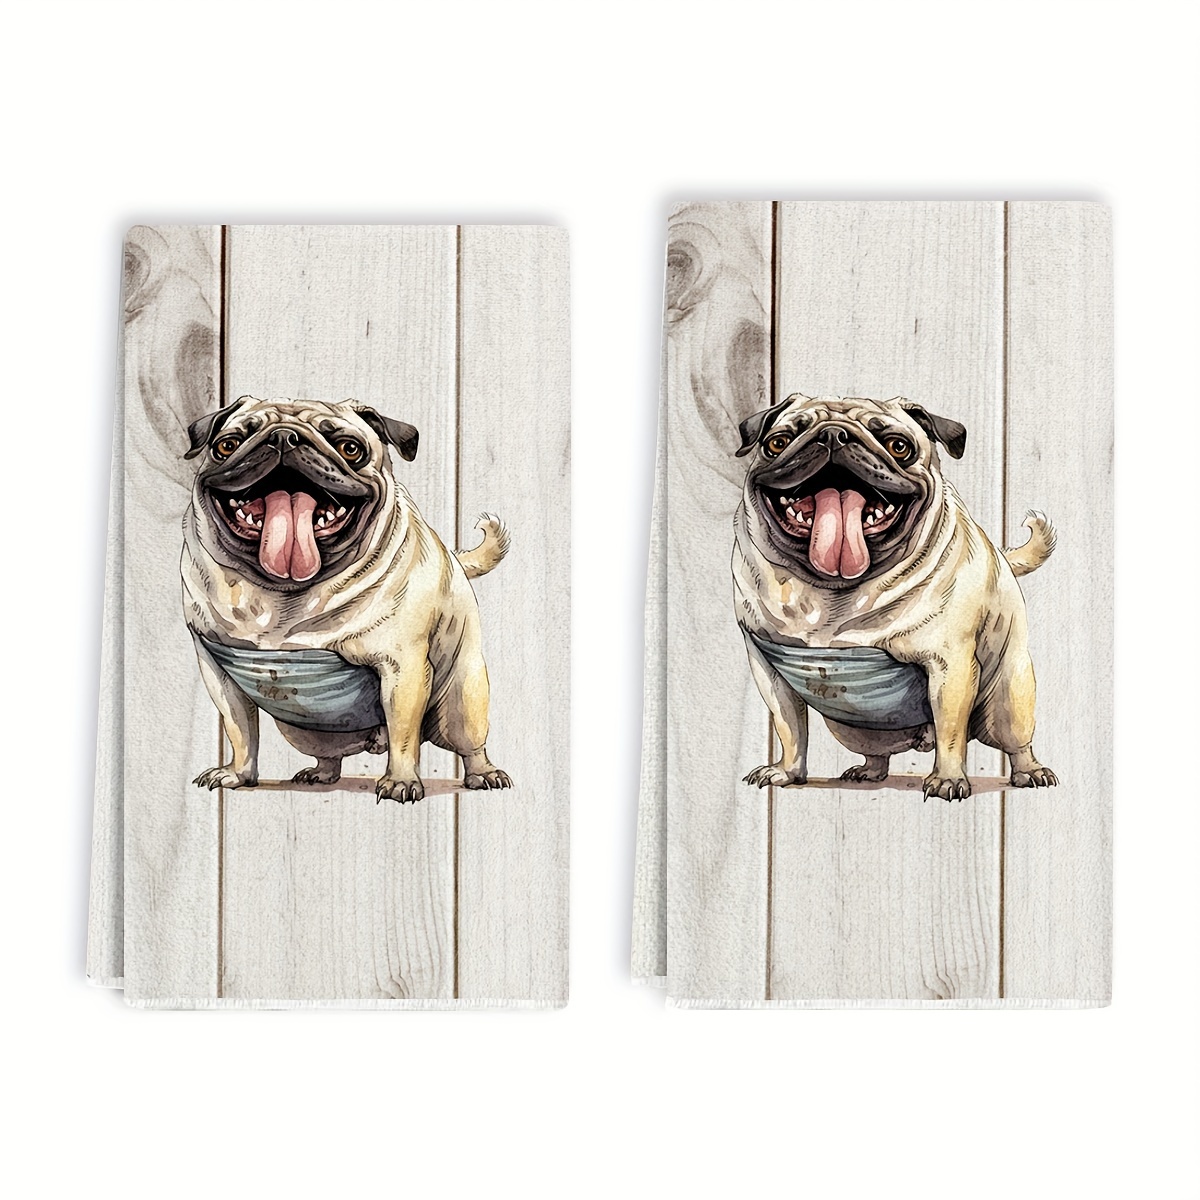 

2pcs, Hand Towels, Wood Grain Cute Dog Printed Dish Towels, Ultra-fine Microfiber Contemporary Absorbent Dish Cloths, Tea Towels For Cooking, Baking, Housewarming Gift